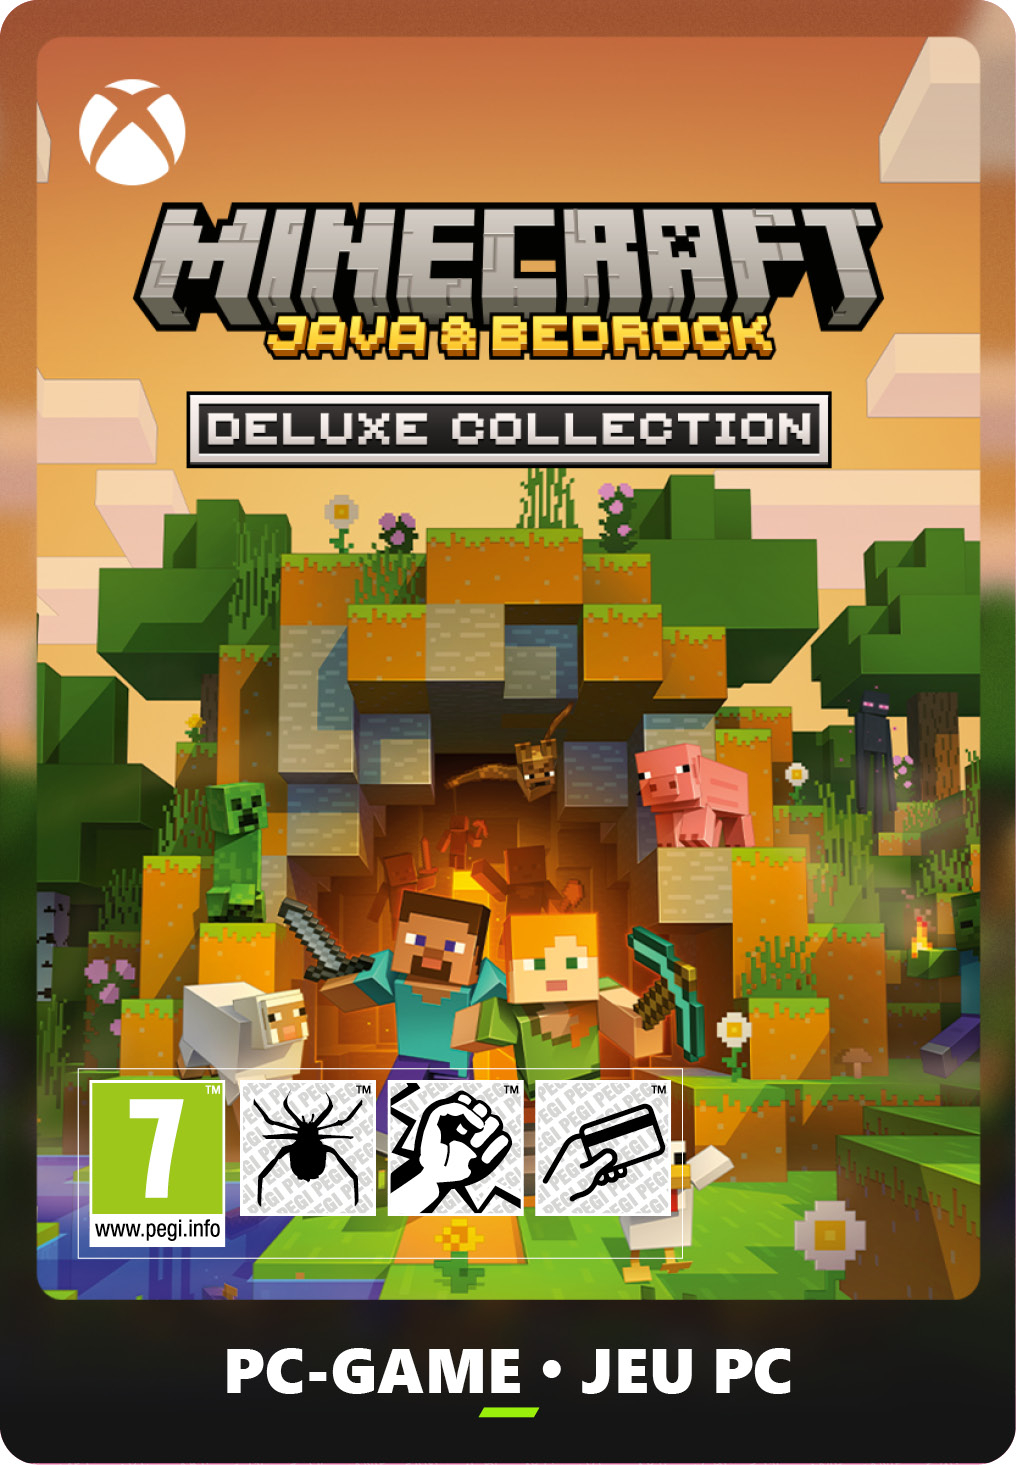 Minecraft: Java & Bedrock Edition Deluxe Collection - PC - 15th Anniversary Sale